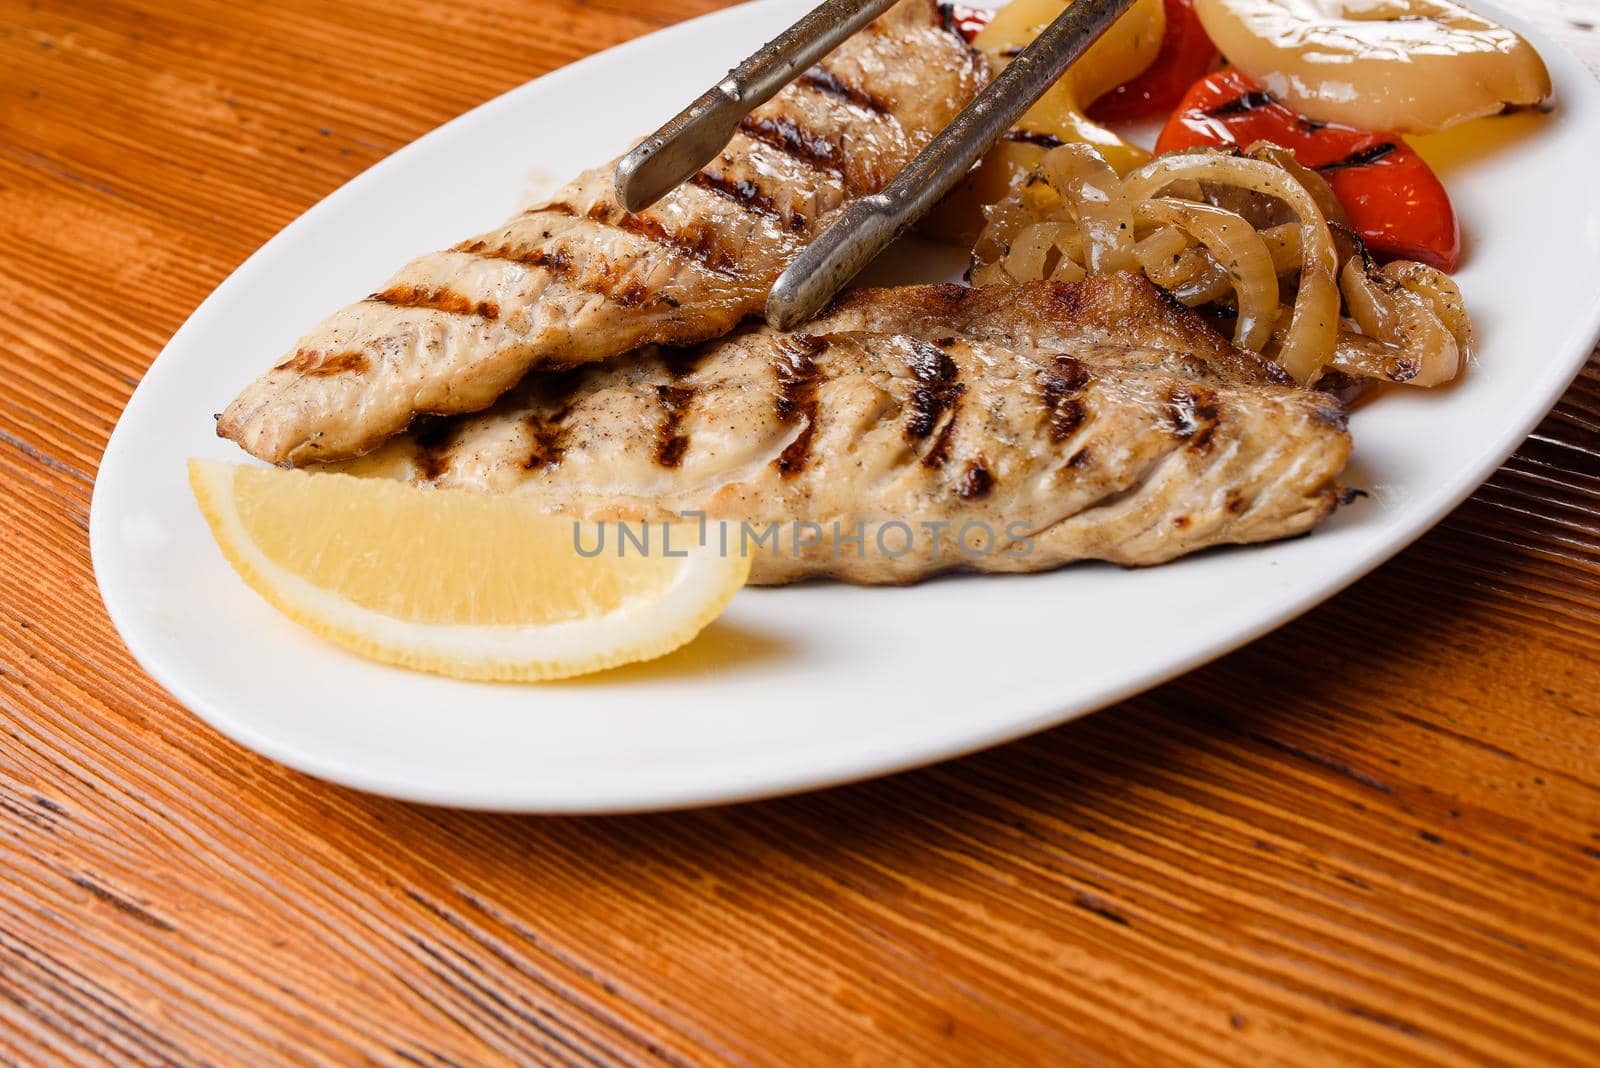 Chicken fillet and grilled vegetables with lemon on a white plate on a wooden table. Serving the dish with metal tongs by Rabizo